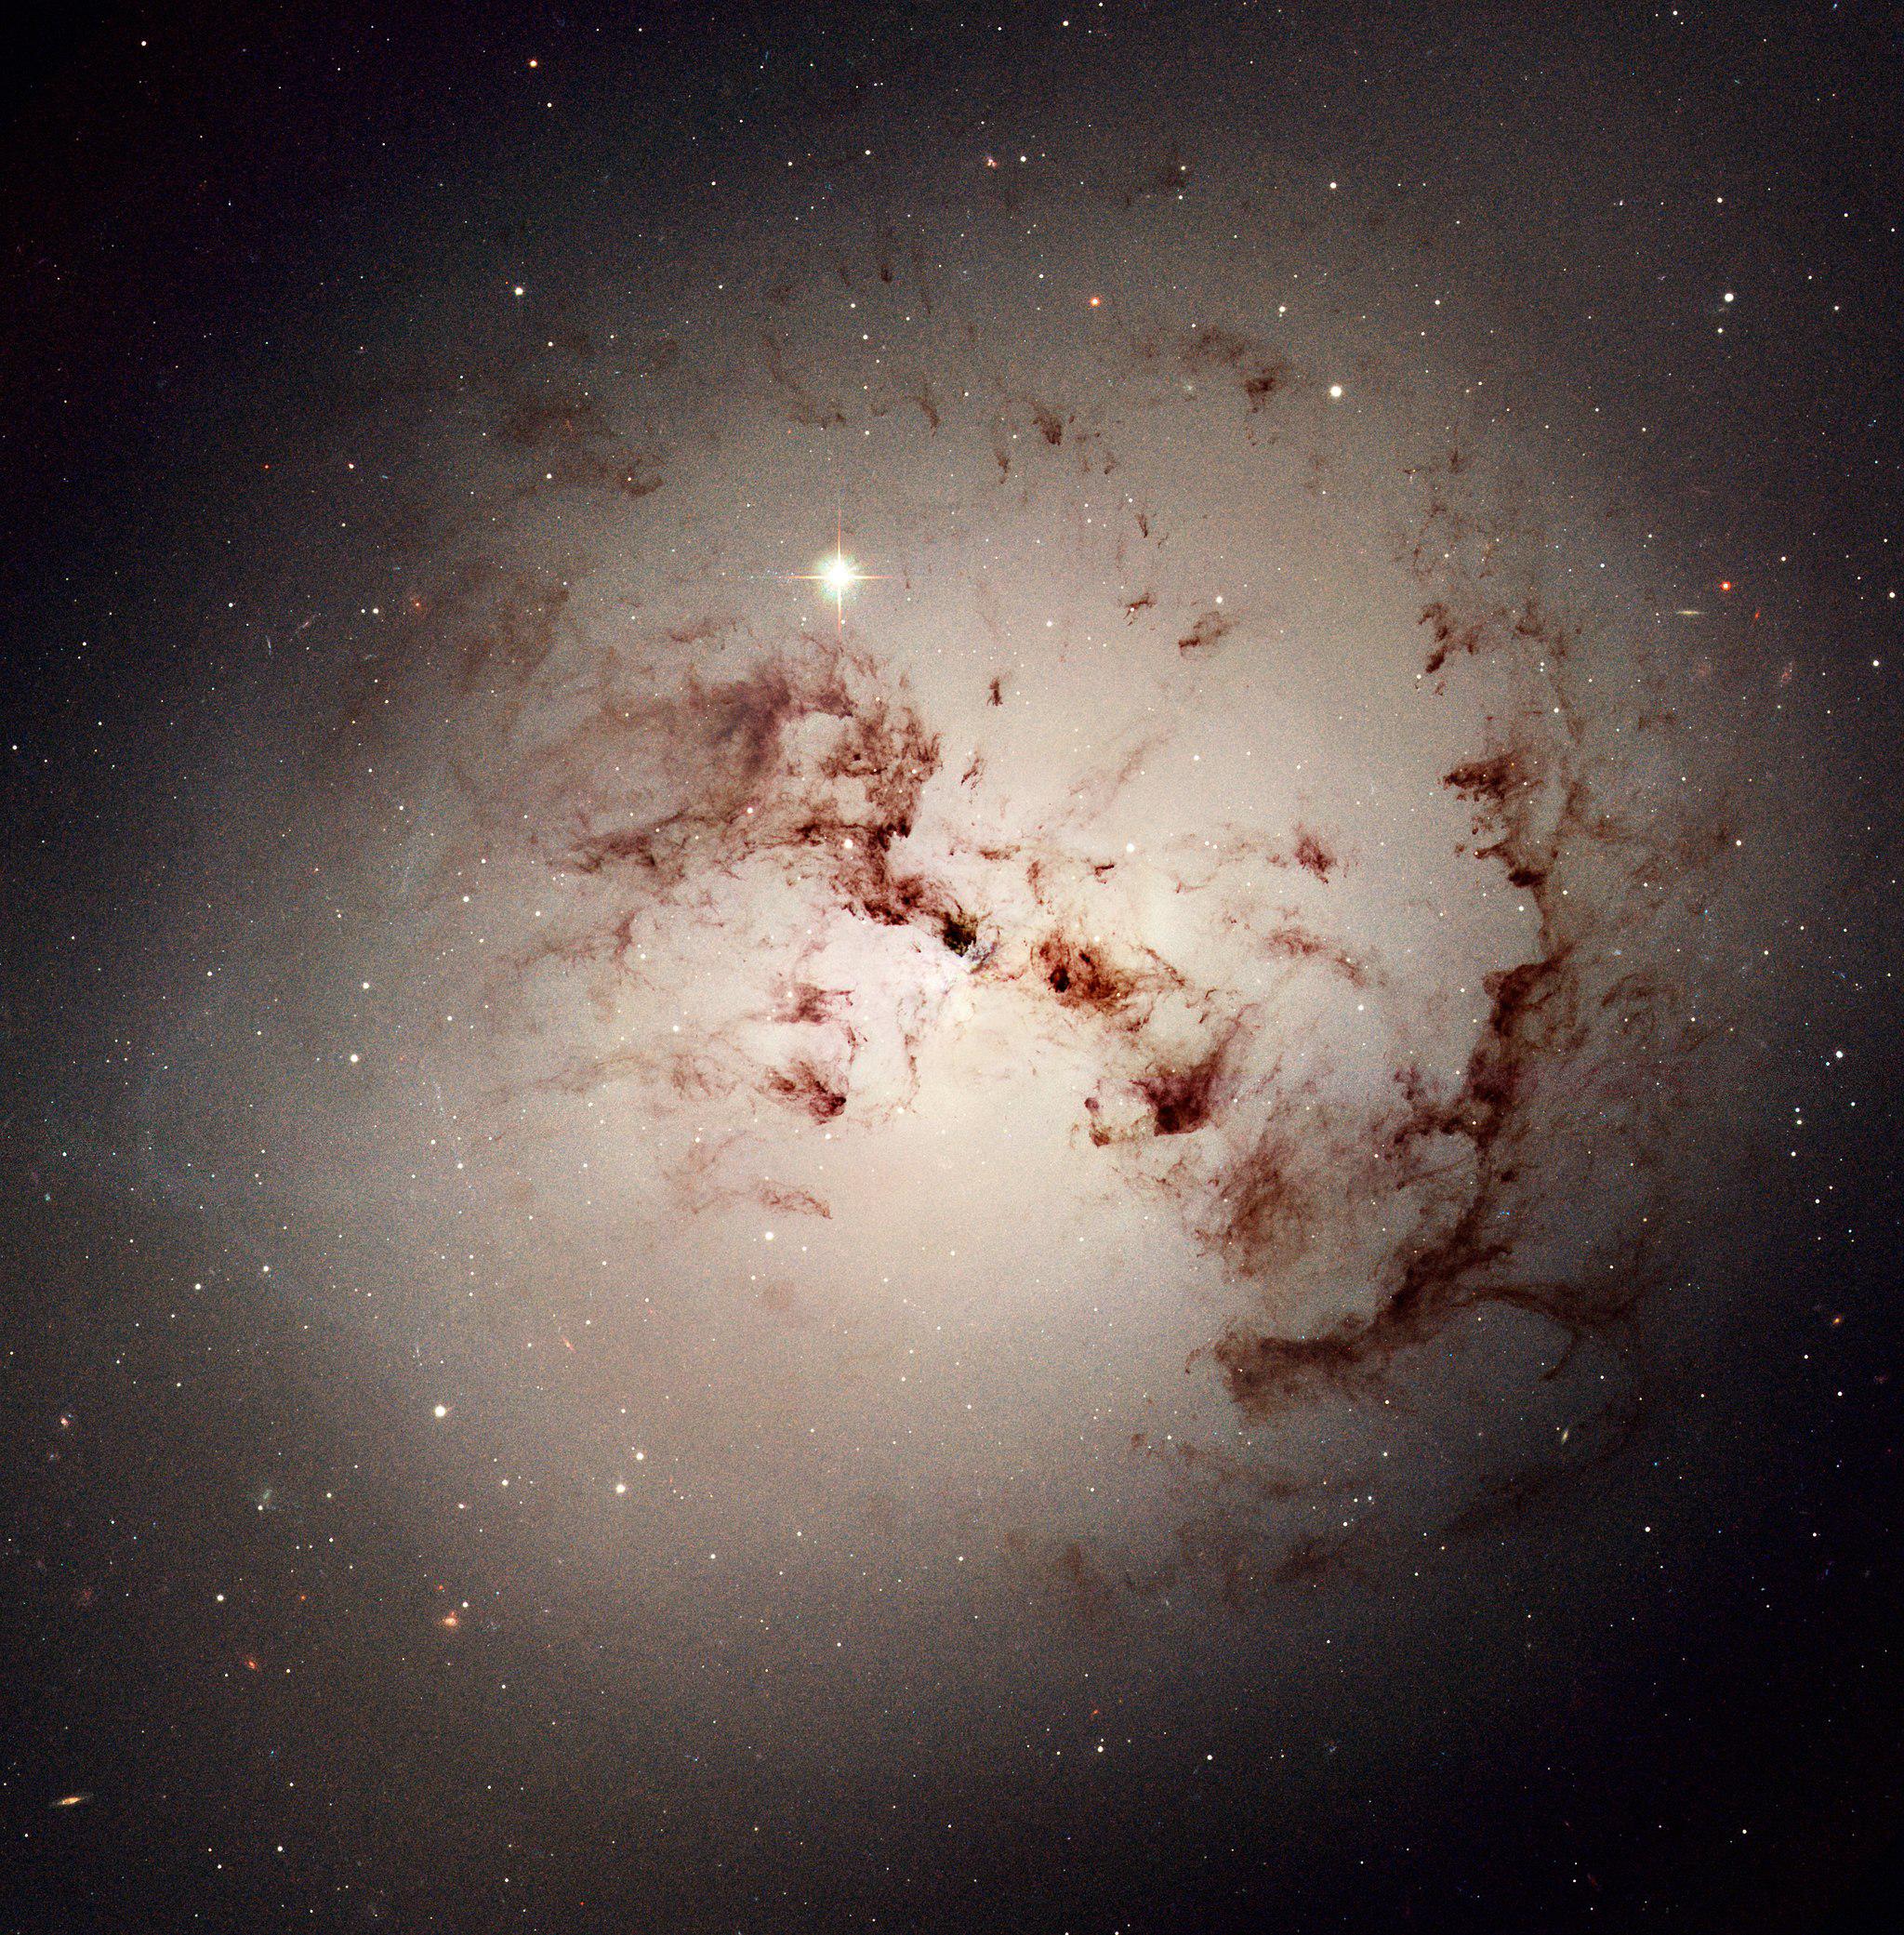 The galaxy NGC 1316 is of the elliptical type (Source: Wikimedia Commons/NASA)